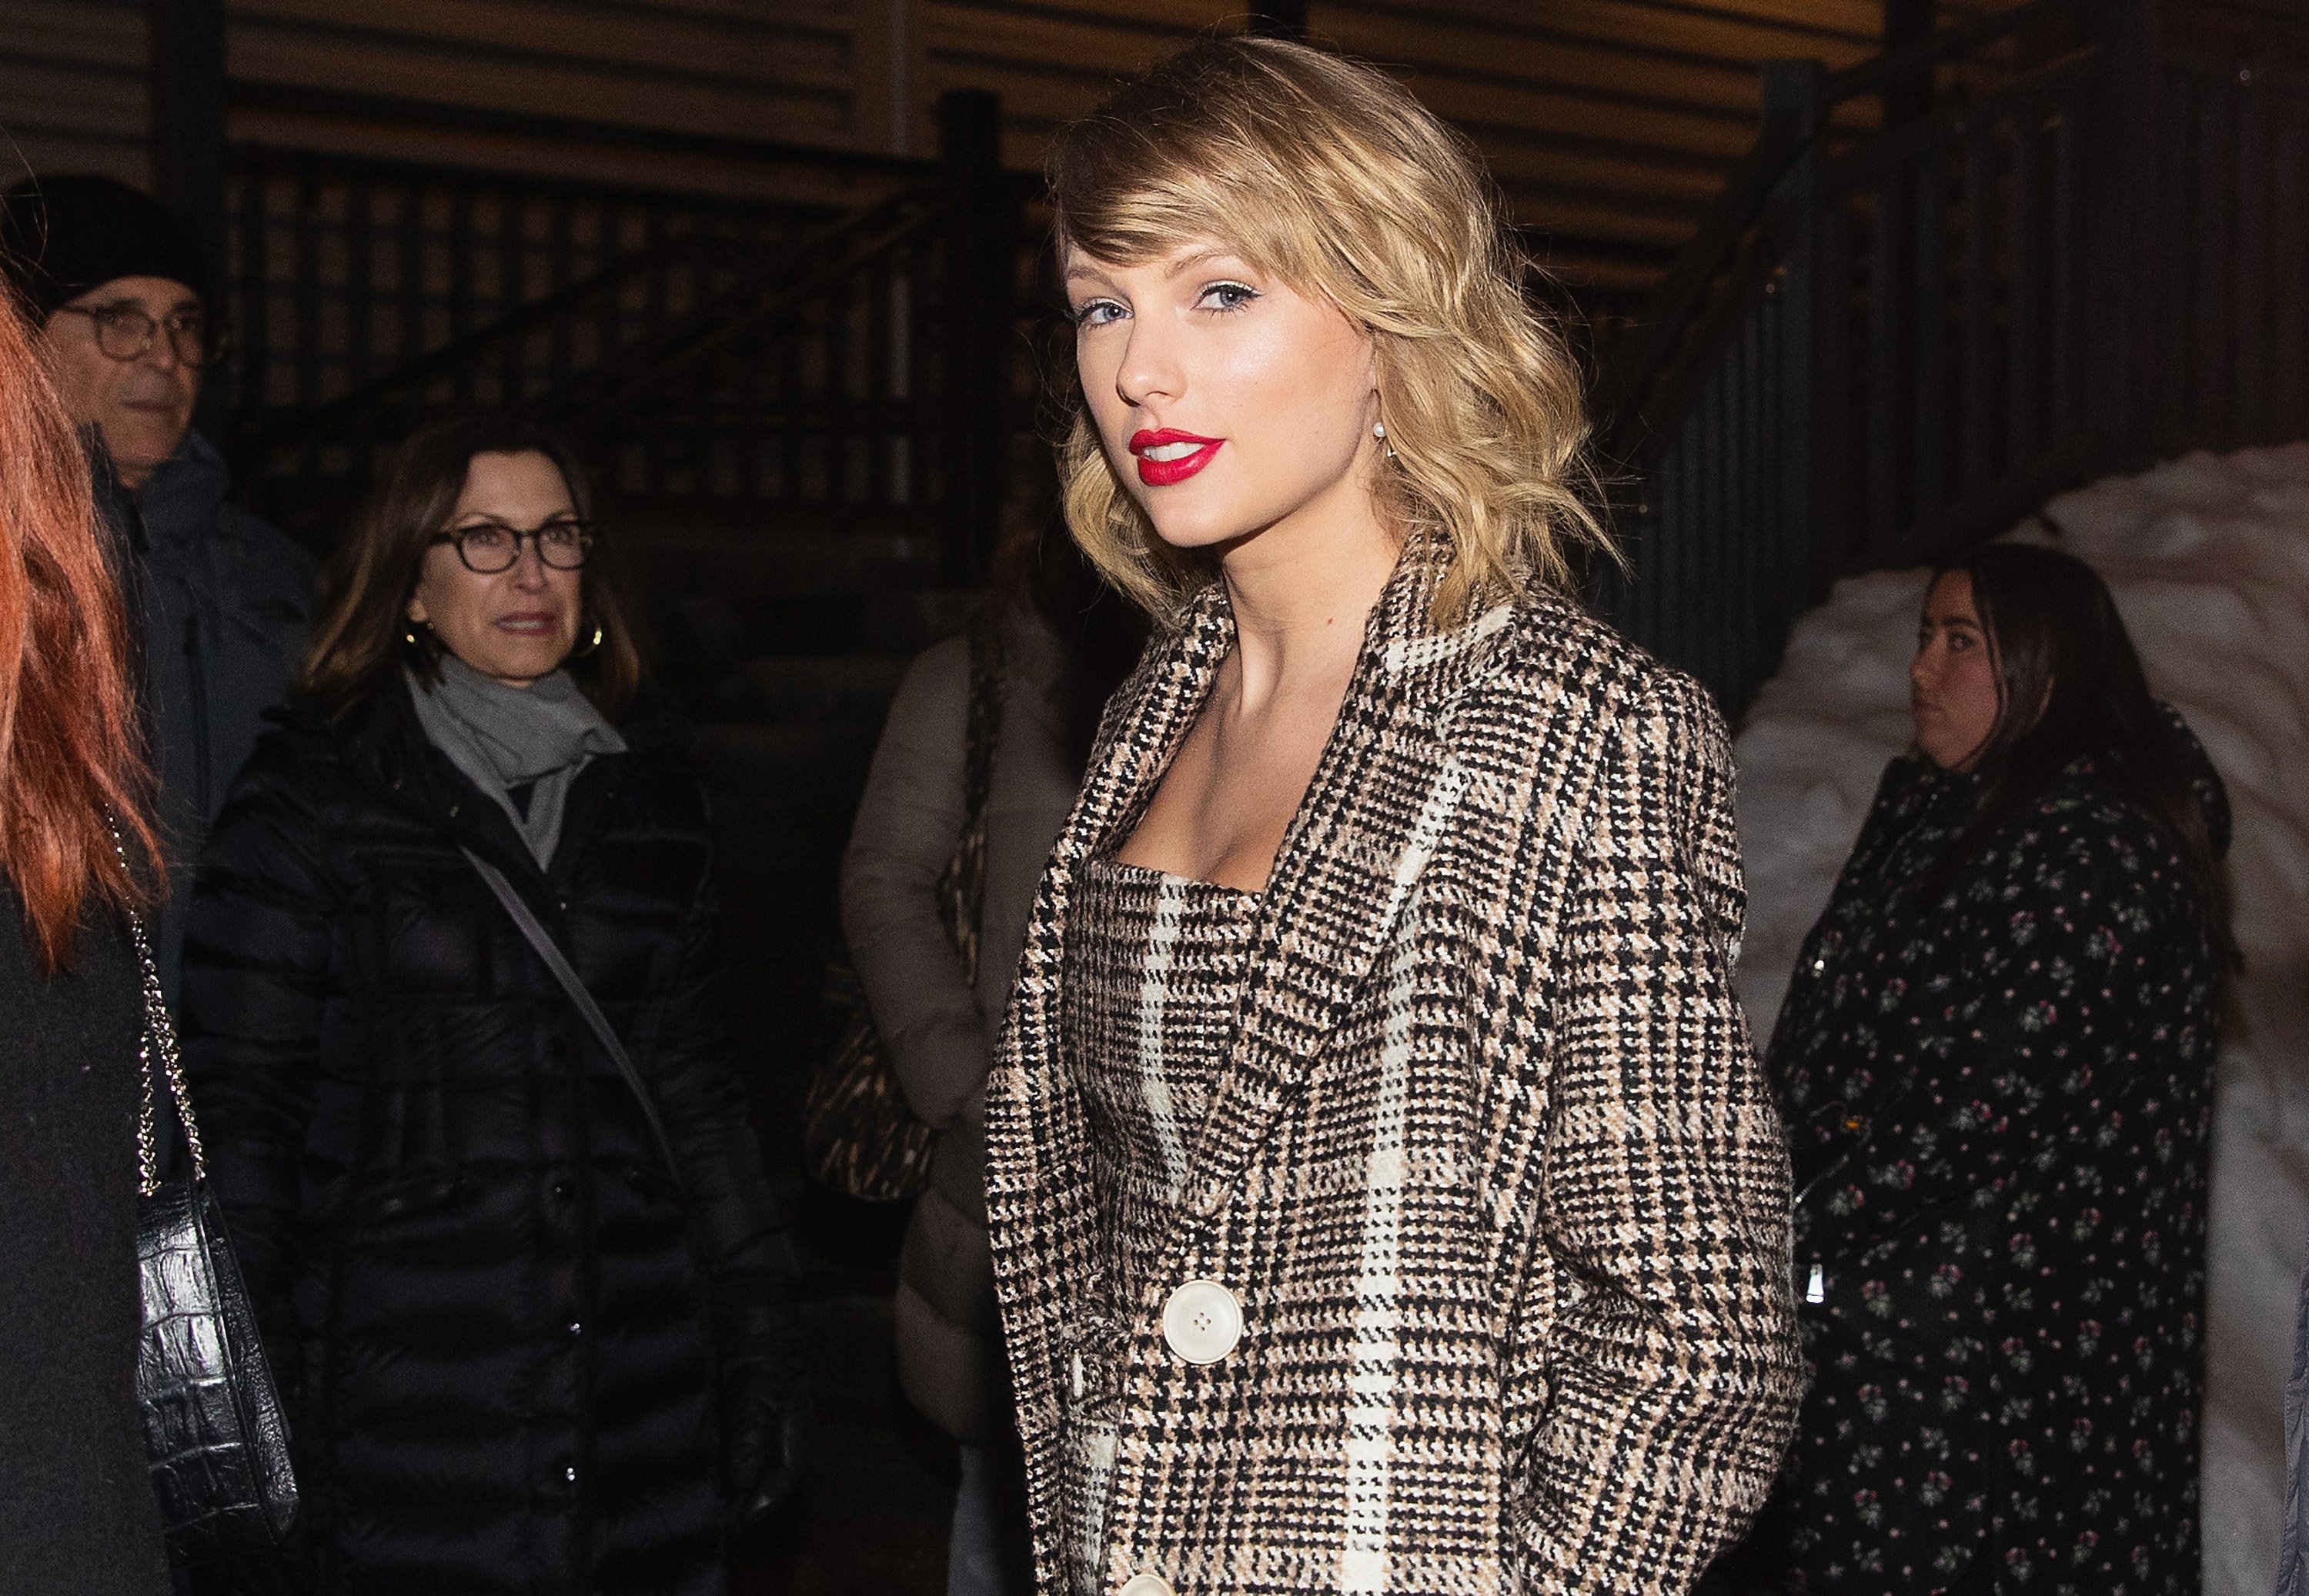 Taylor Swift in a black and white coat